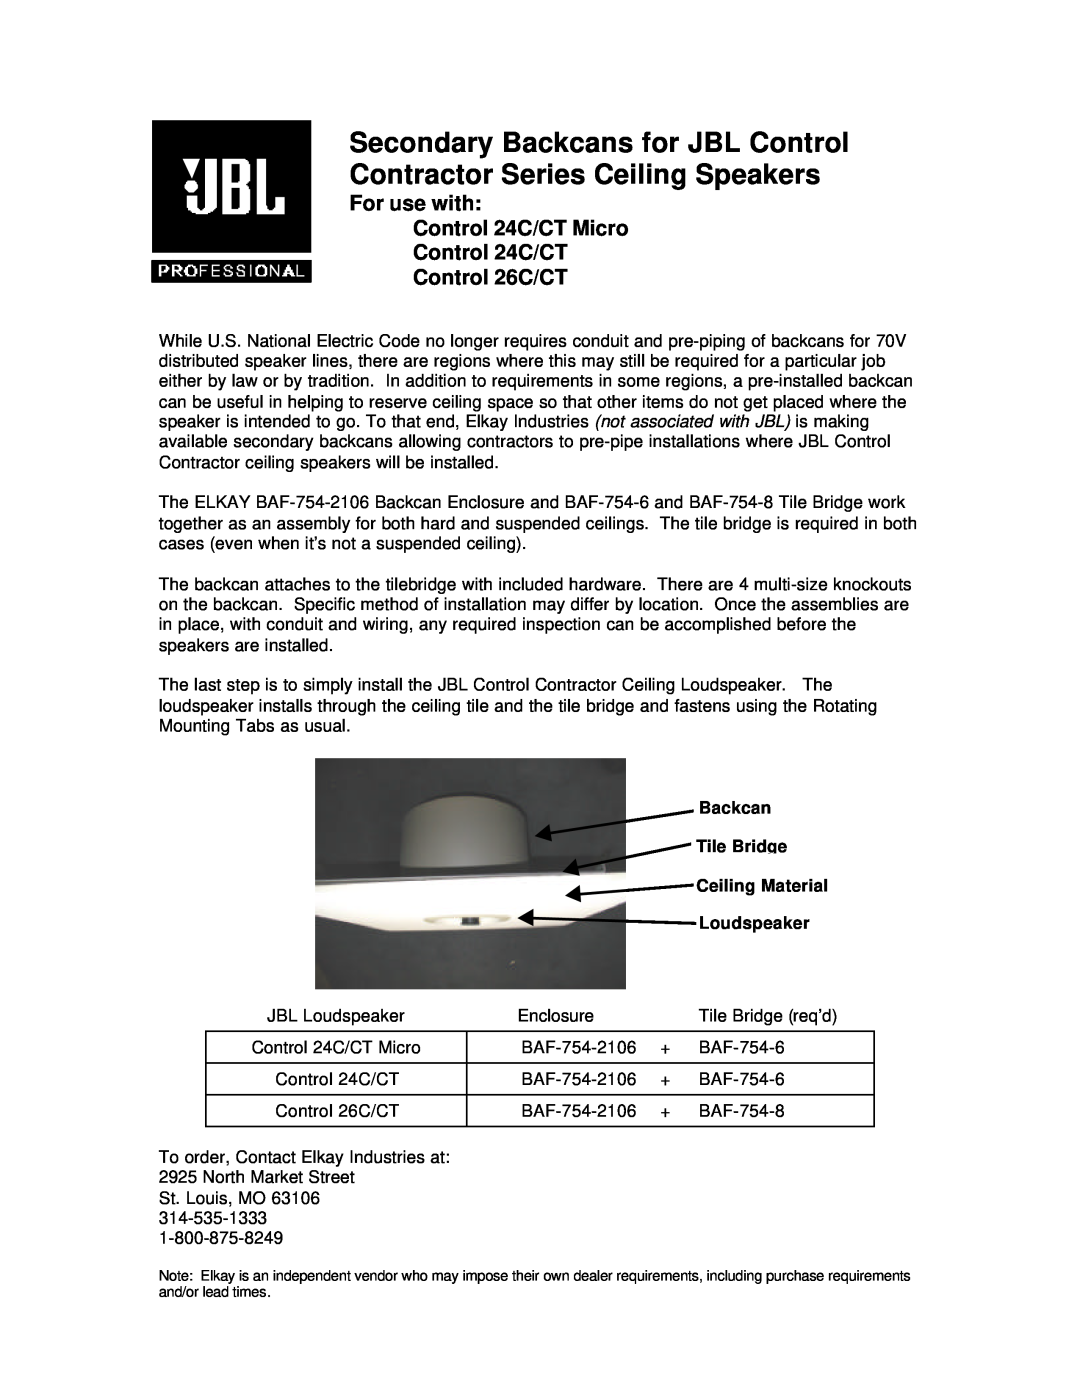 JBL 26C/CT, 24C/CT MICRO manual Secondary Backcans for JBL Control Contractor Series Ceiling Speakers 